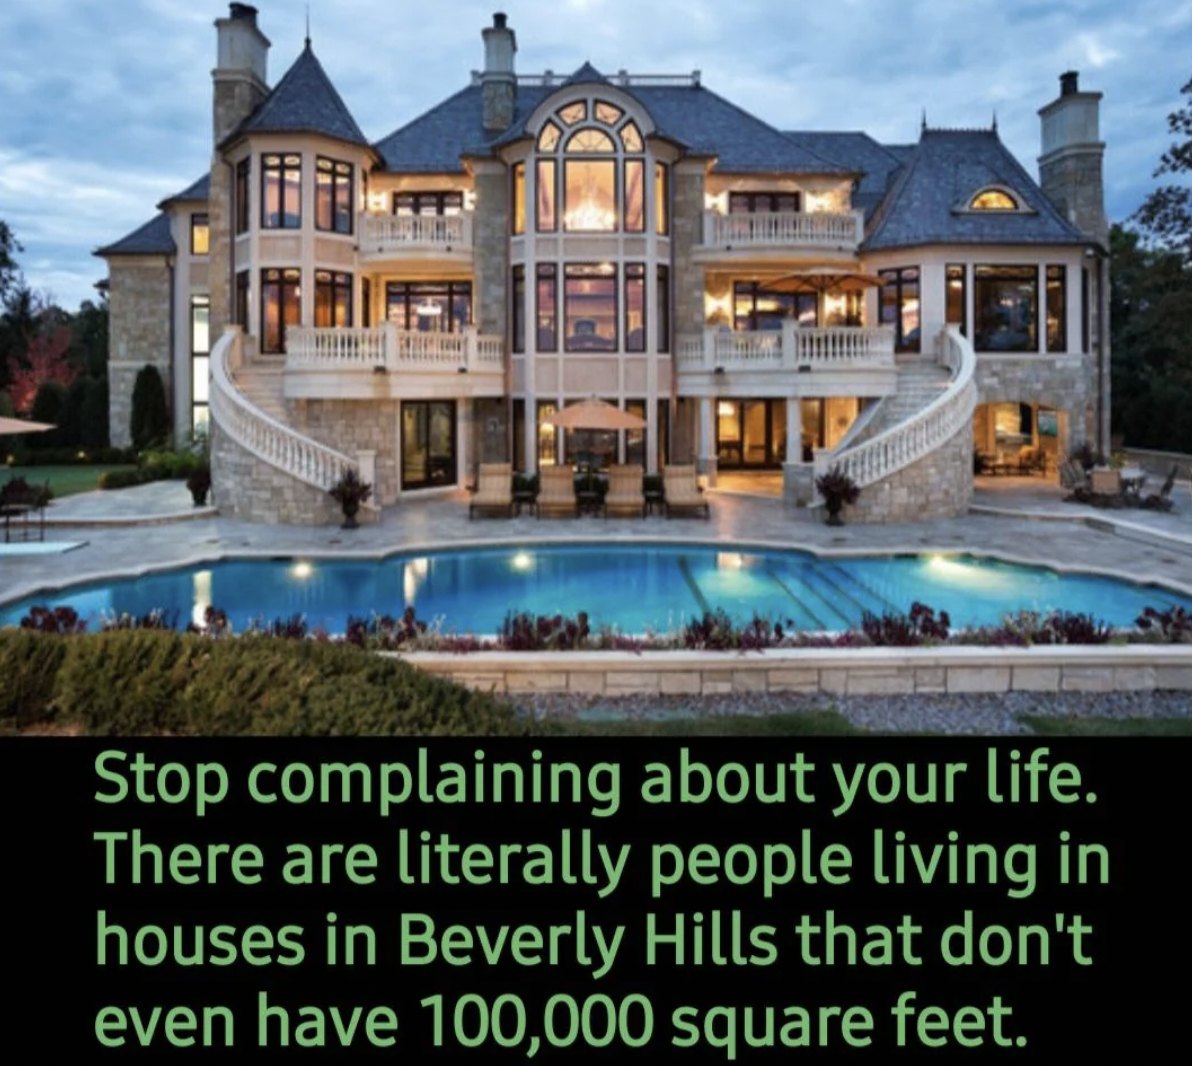 beautiful estates - Stop complaining about your life. There are literally people living in houses in Beverly Hills that don't even have 100,000 square feet.